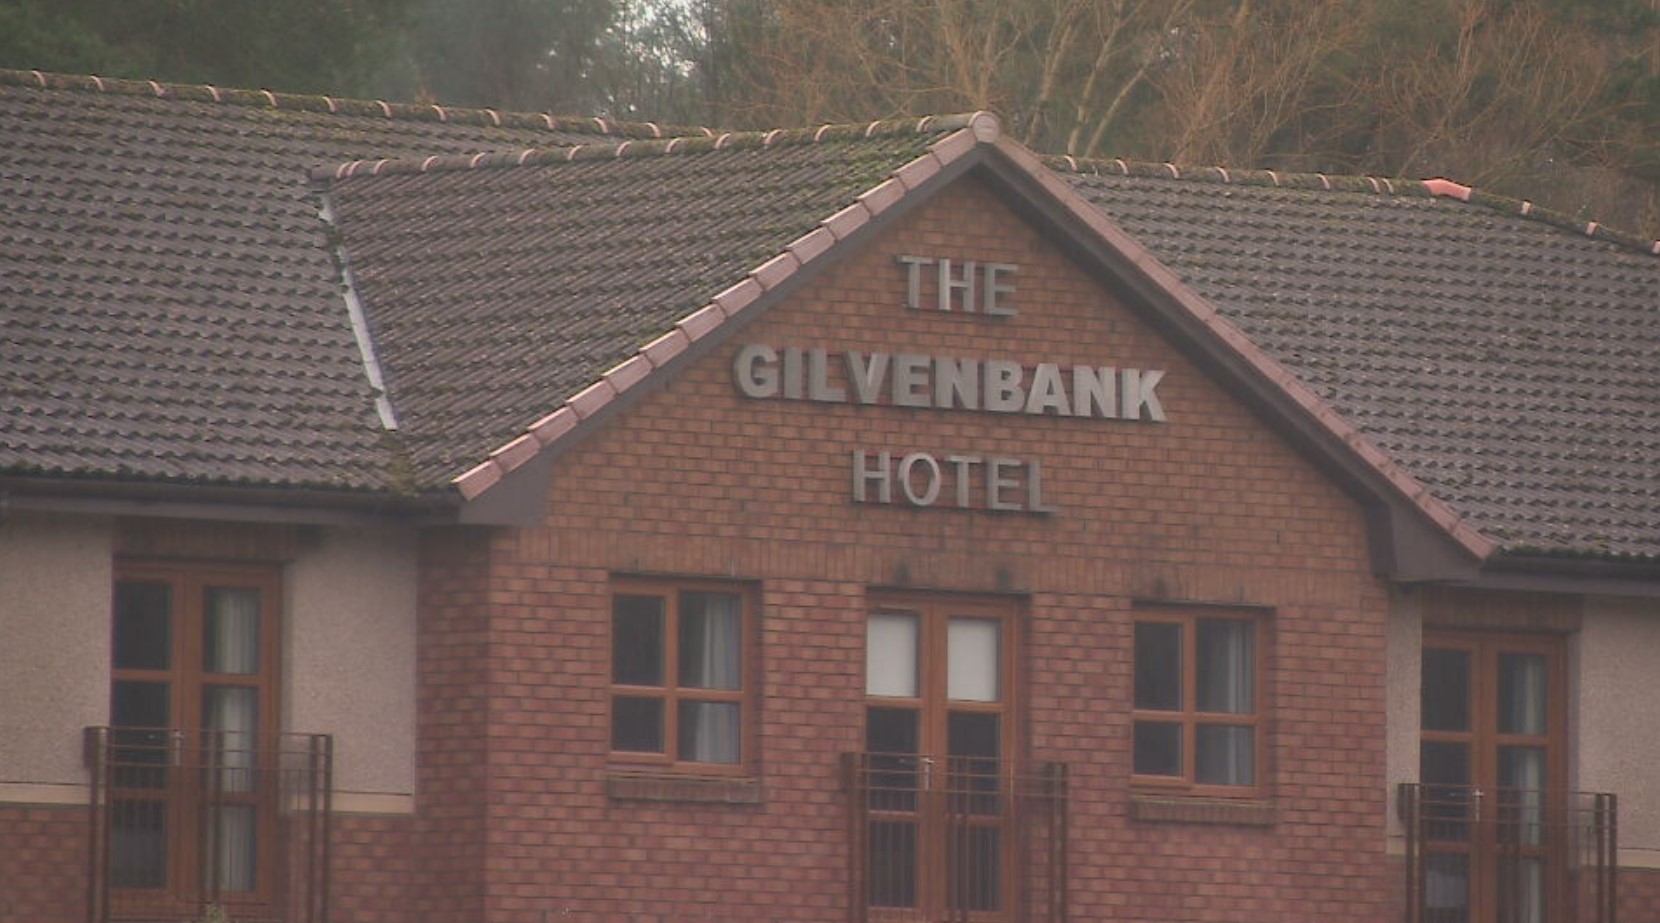 The GIlvenbank Hotel is turning the event space into more occupancy rooms